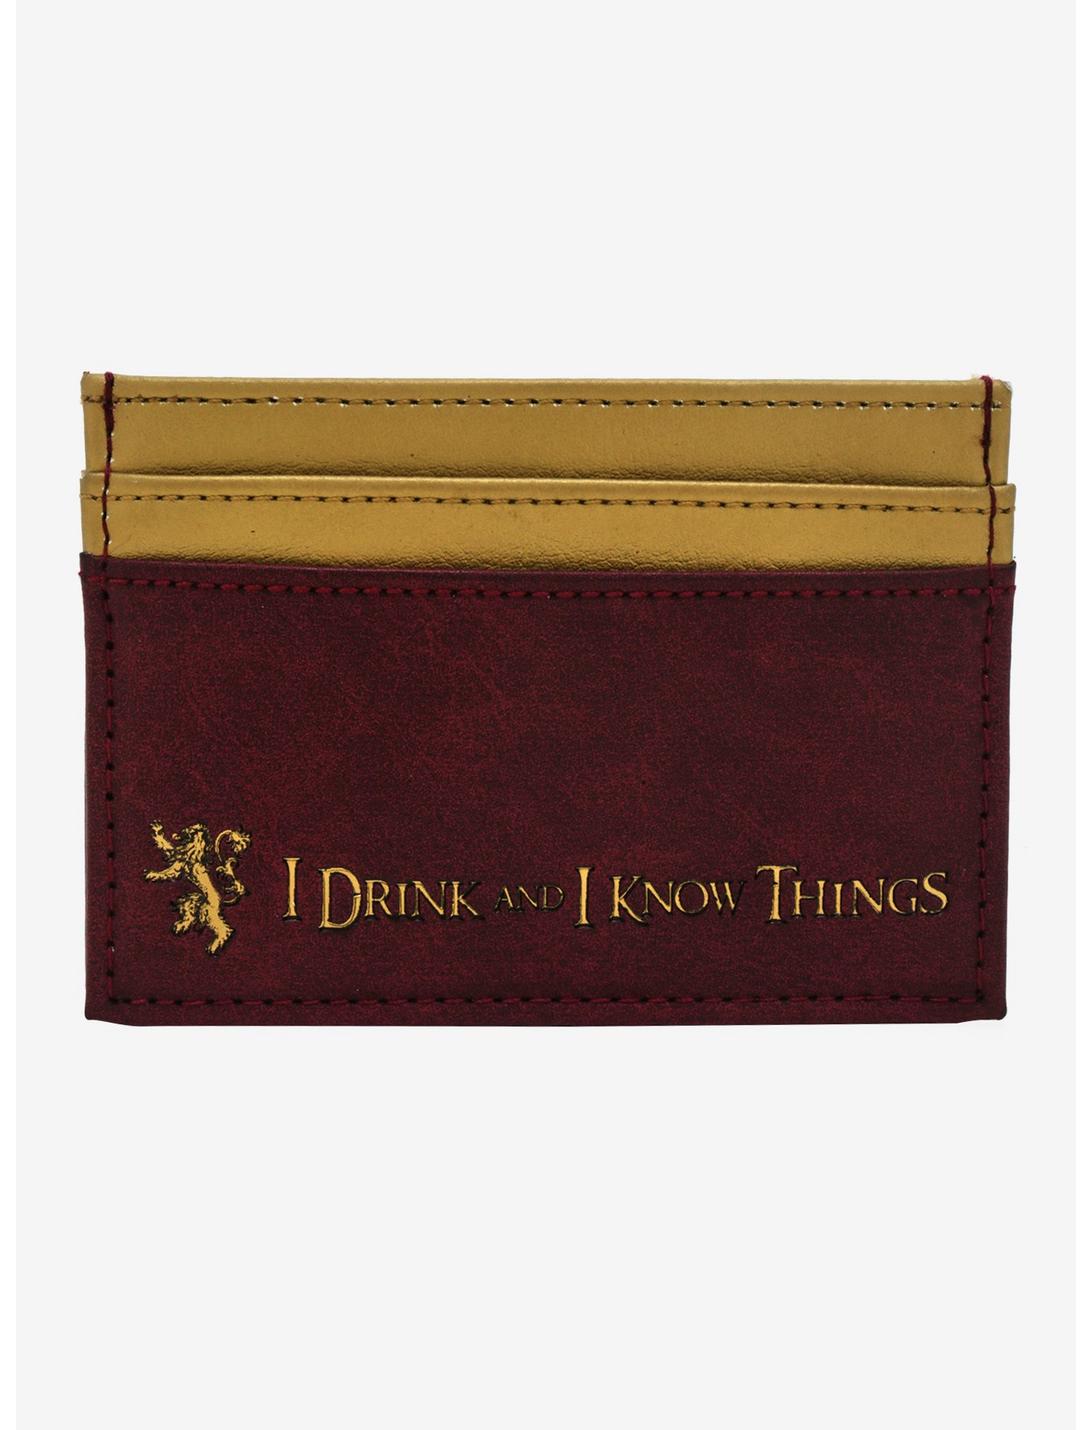 Game Of Thrones Tyrion Lannister Cardholder - BoxLunch Exclusive, , hi-res